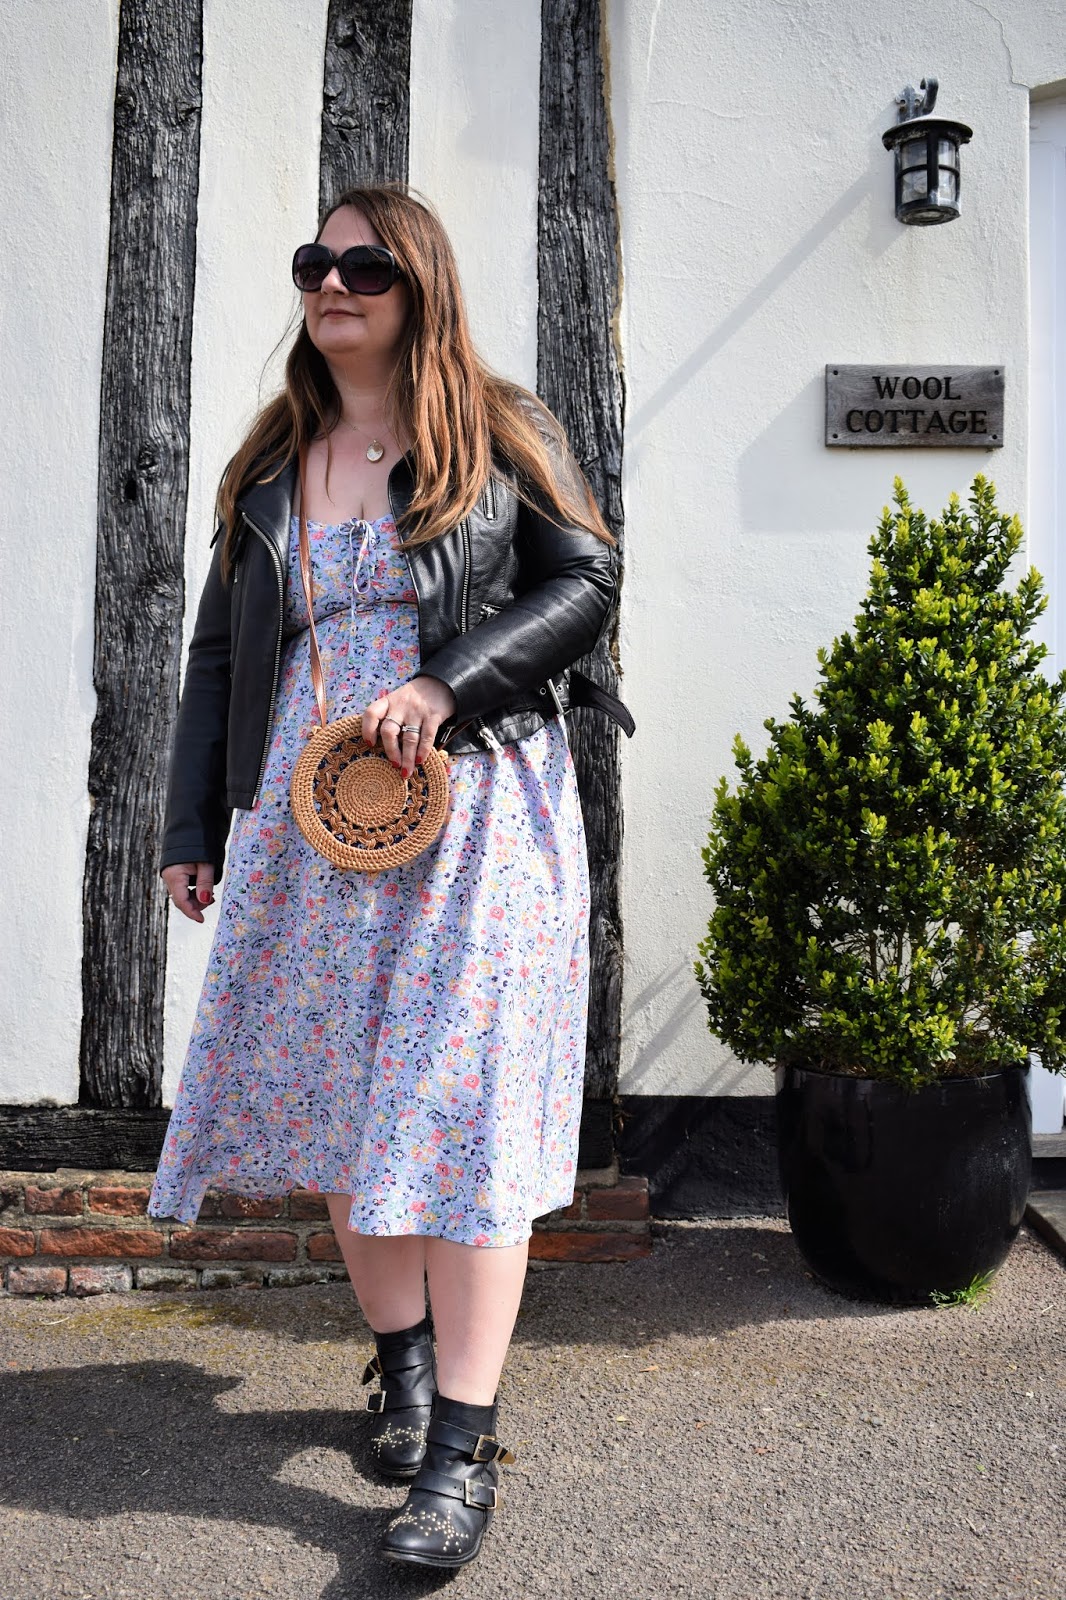 How to wear florals when you're not a girly girl